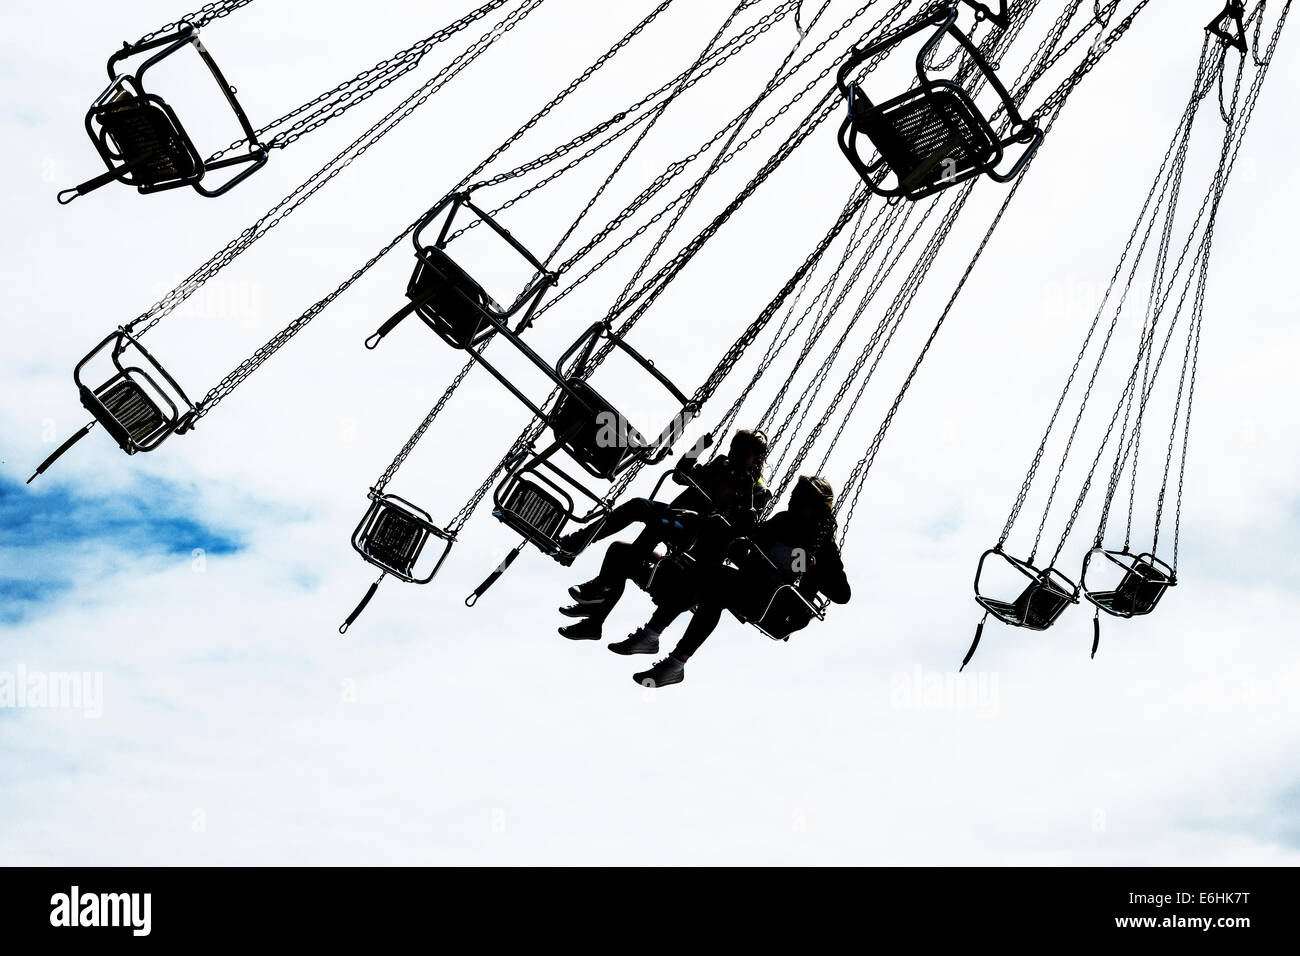 The silhouette of children on a fairground ride. Stock Photo